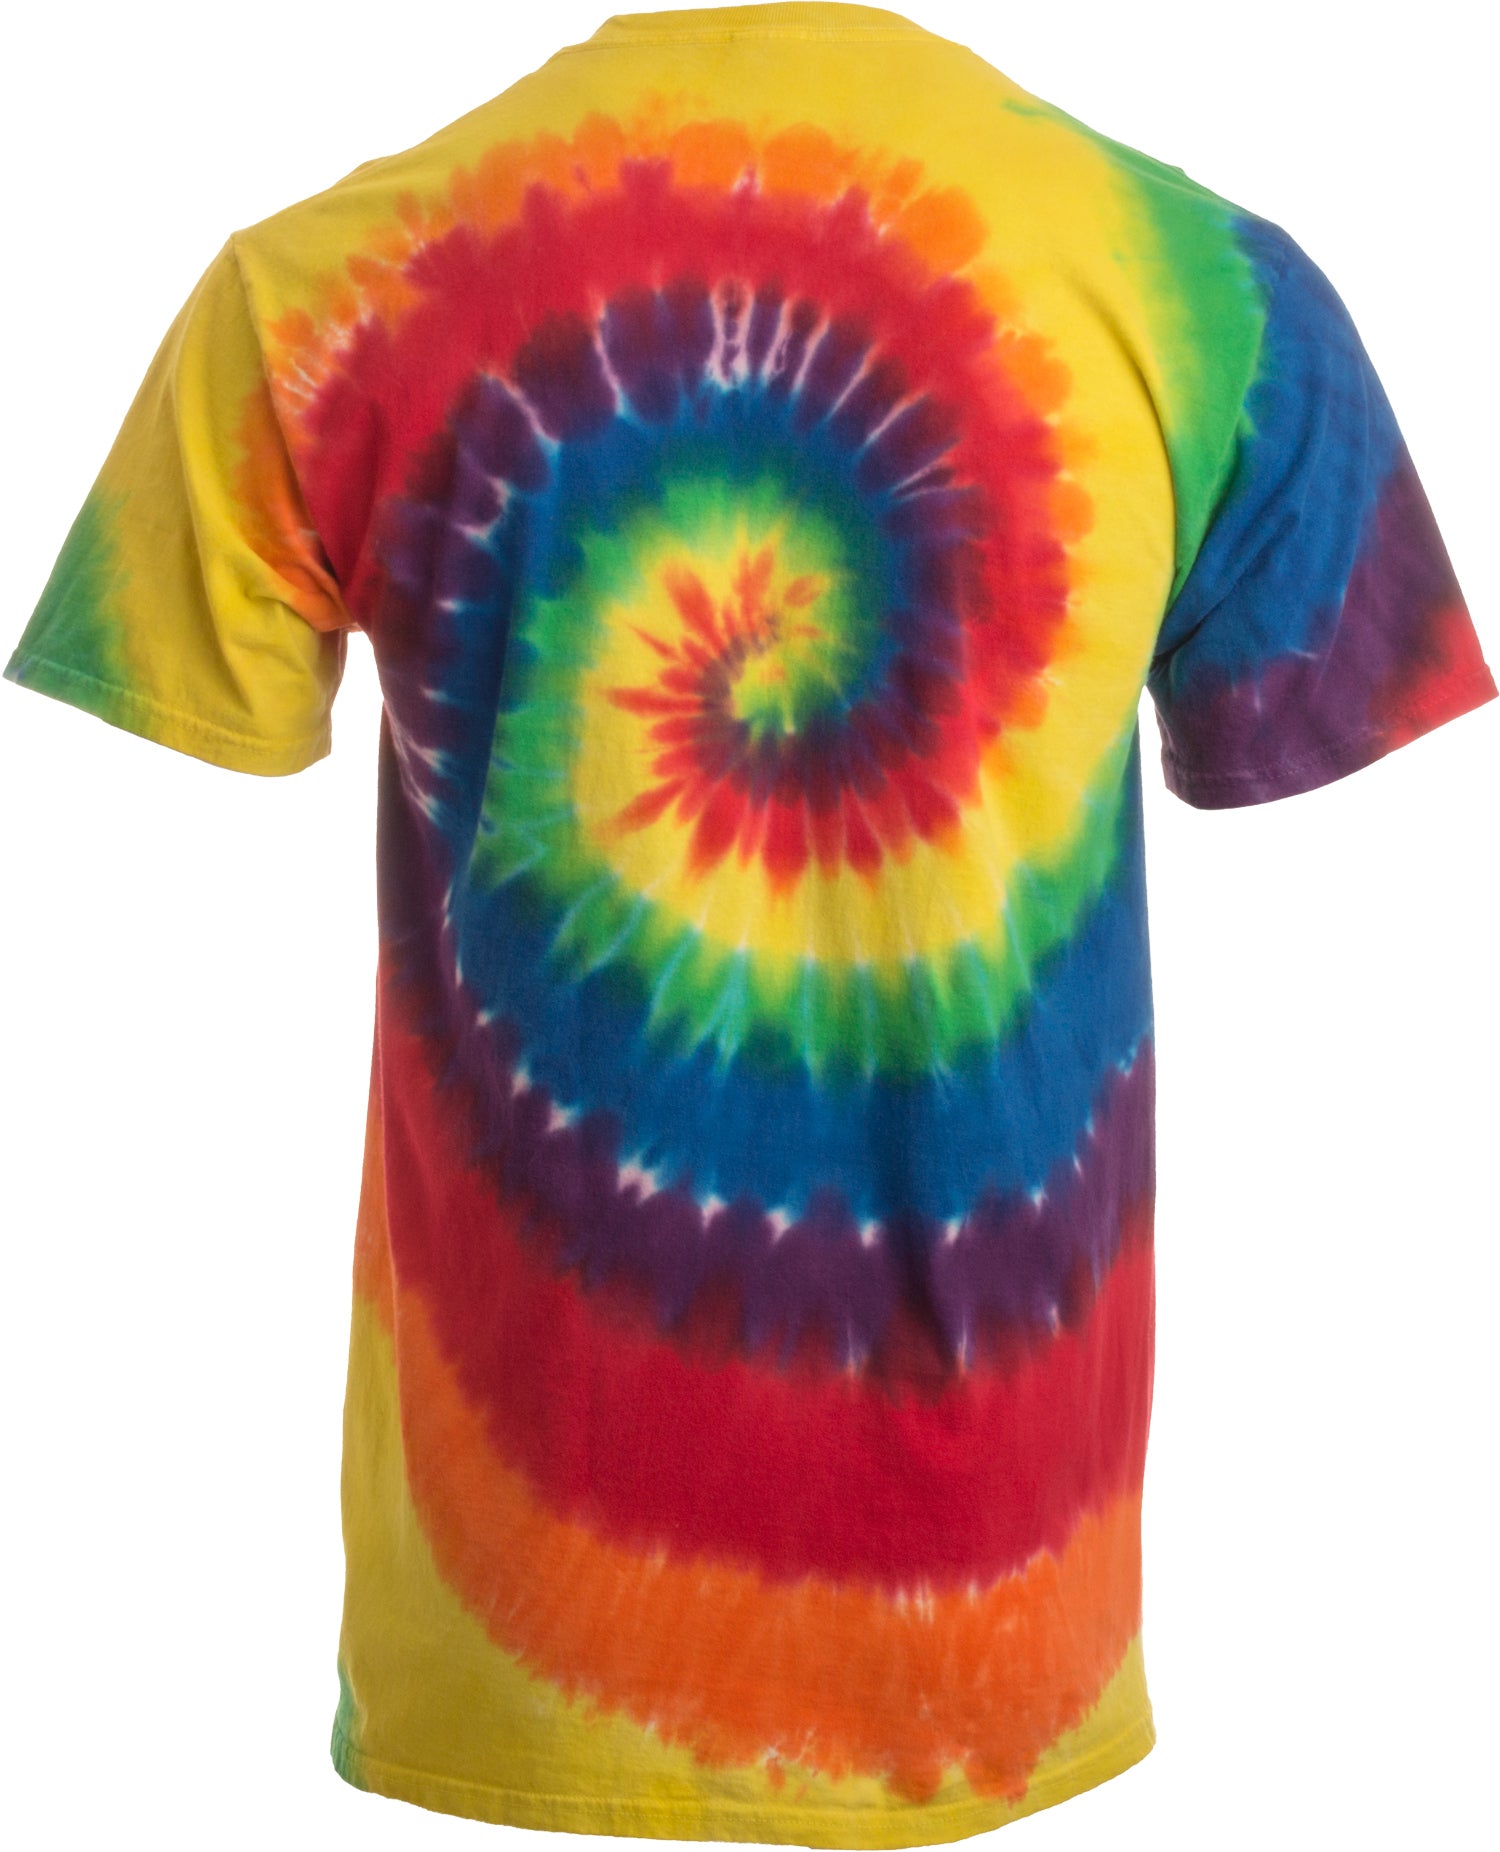 This is Your Brain on Drugs | Funny Festival Rave Concert Tie Dye ...